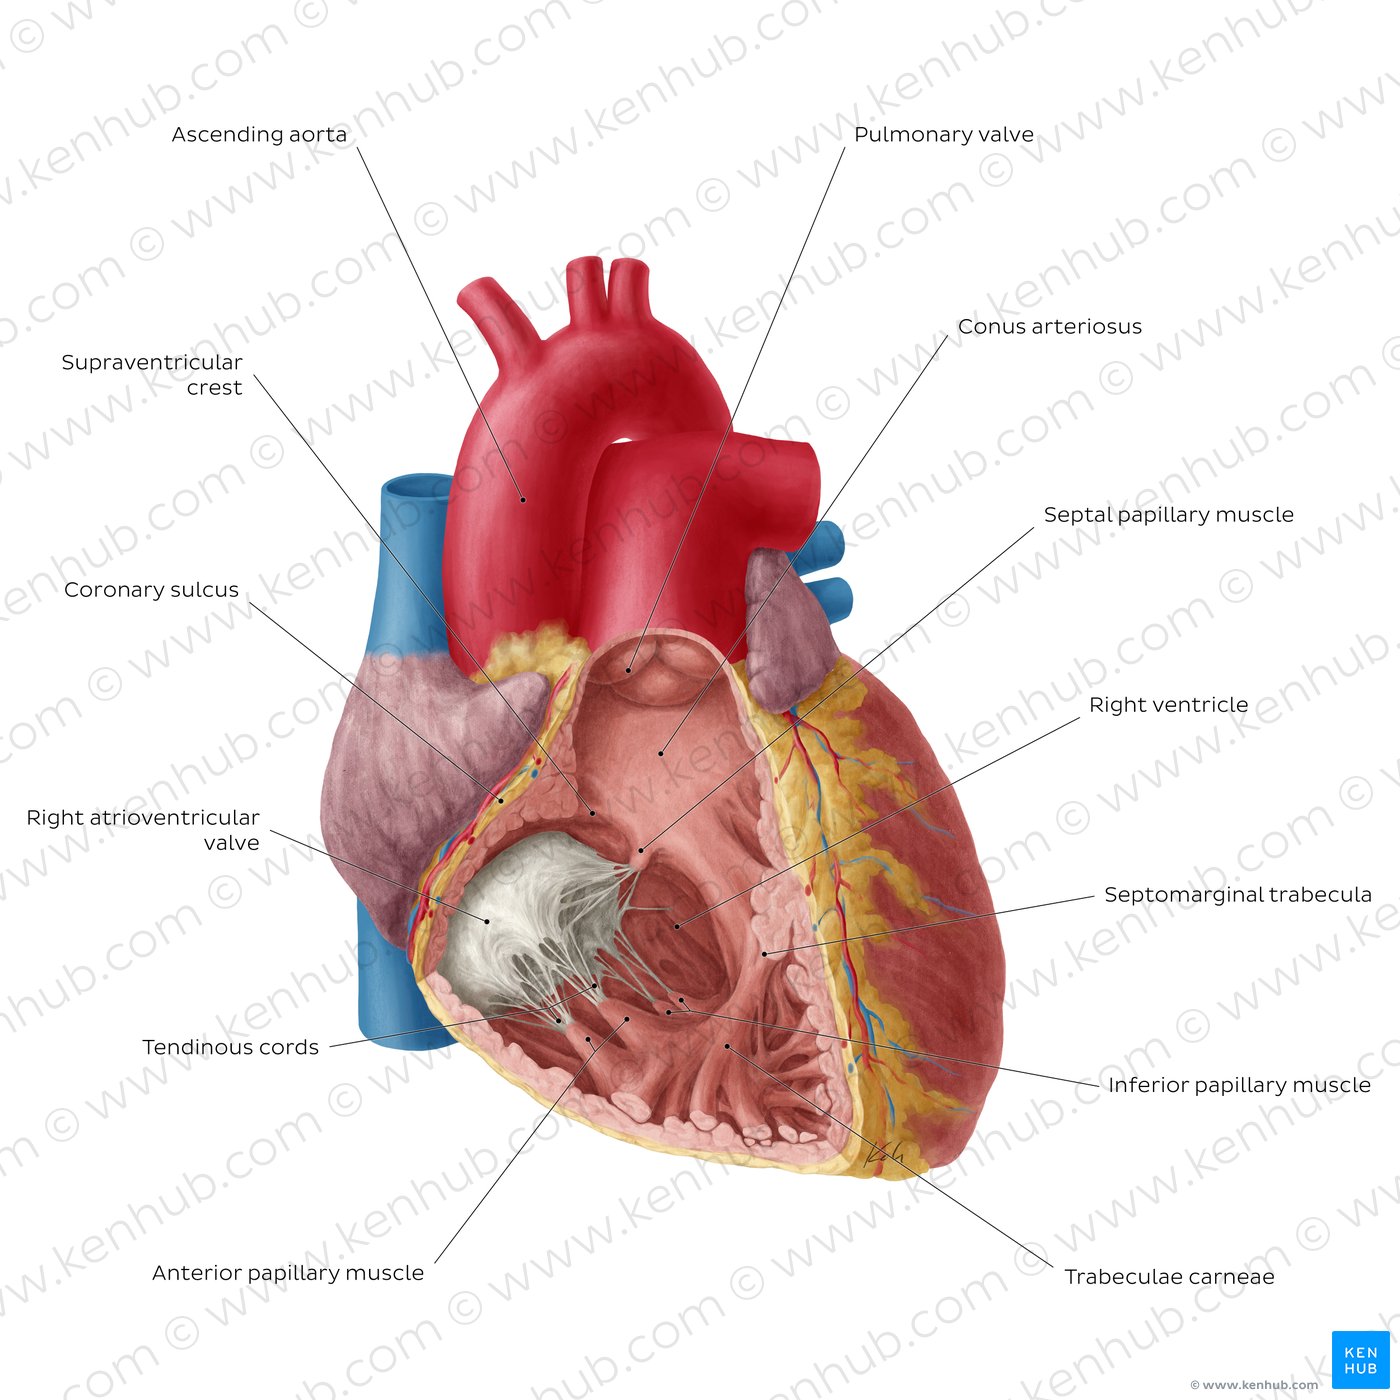 Heart: Right ventricle